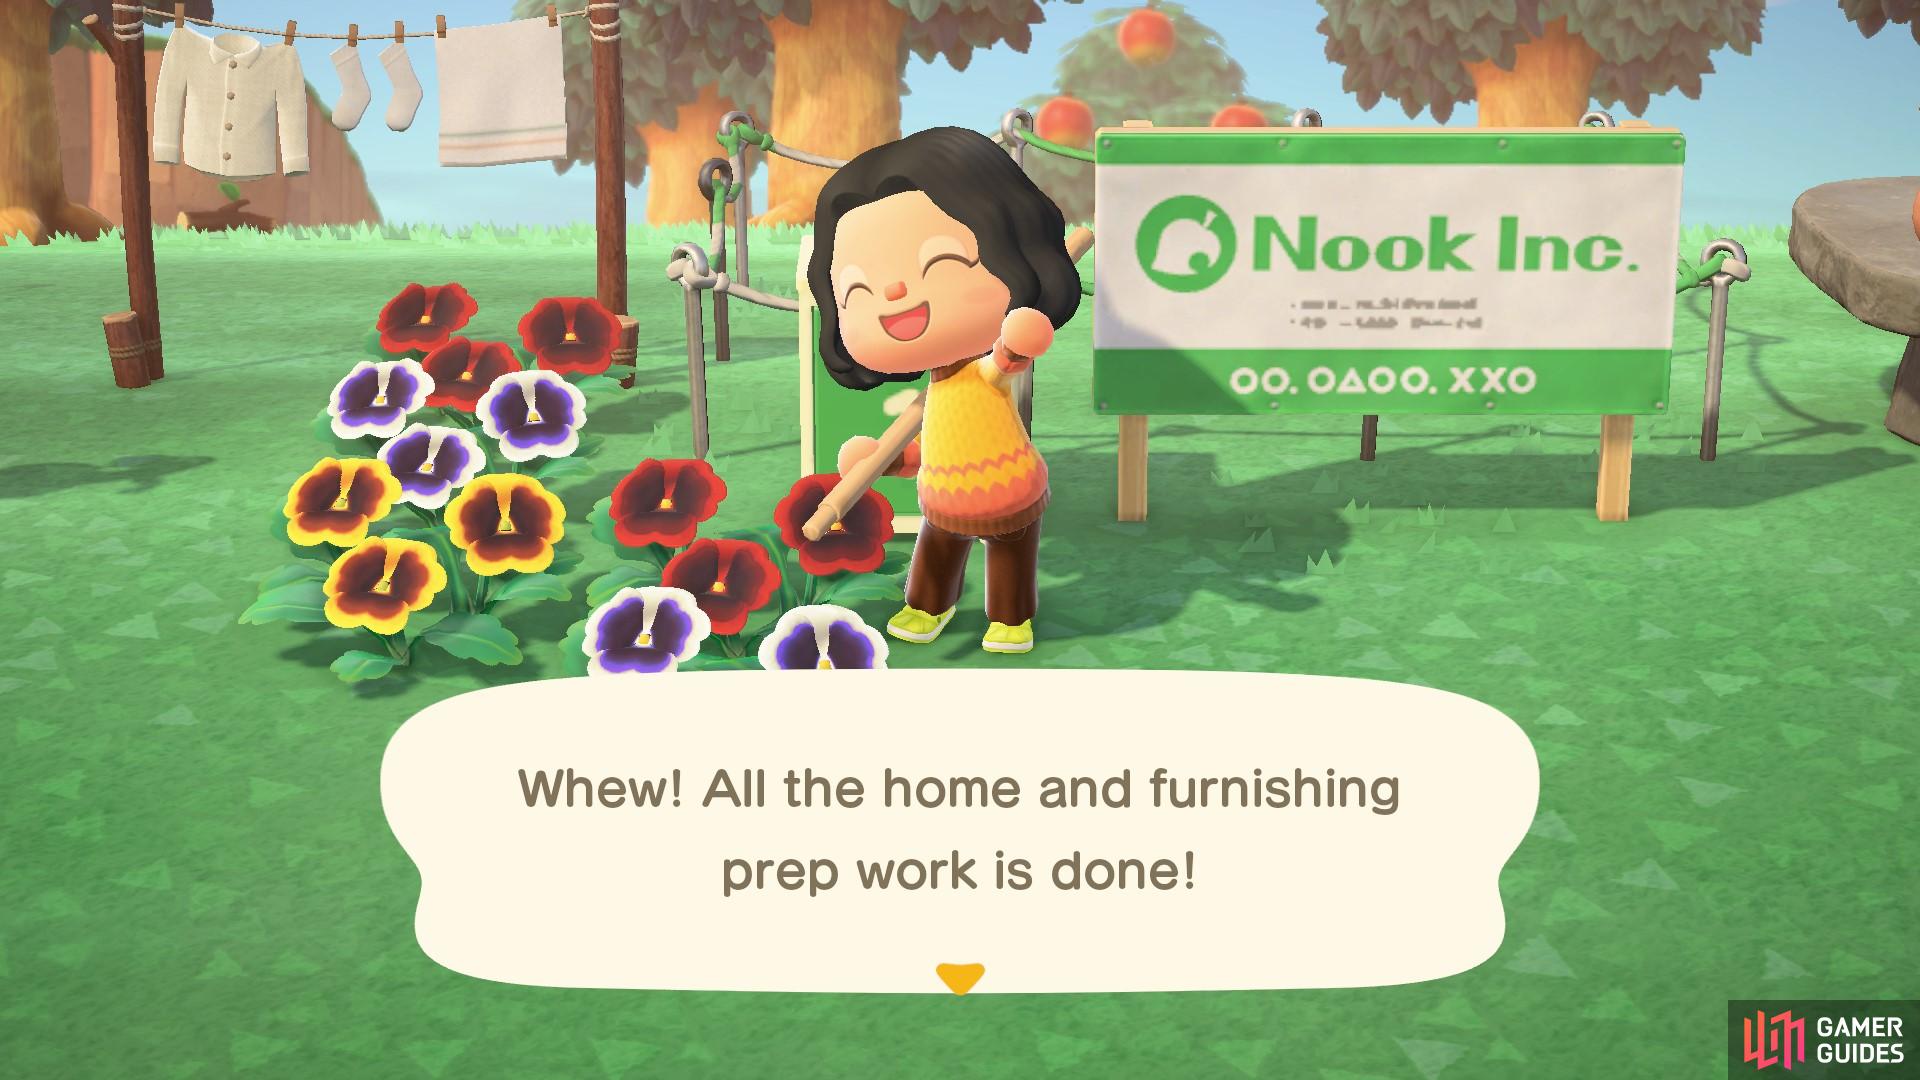 That took a lot of resources! But you’re finally done and ready to meet new villagers.